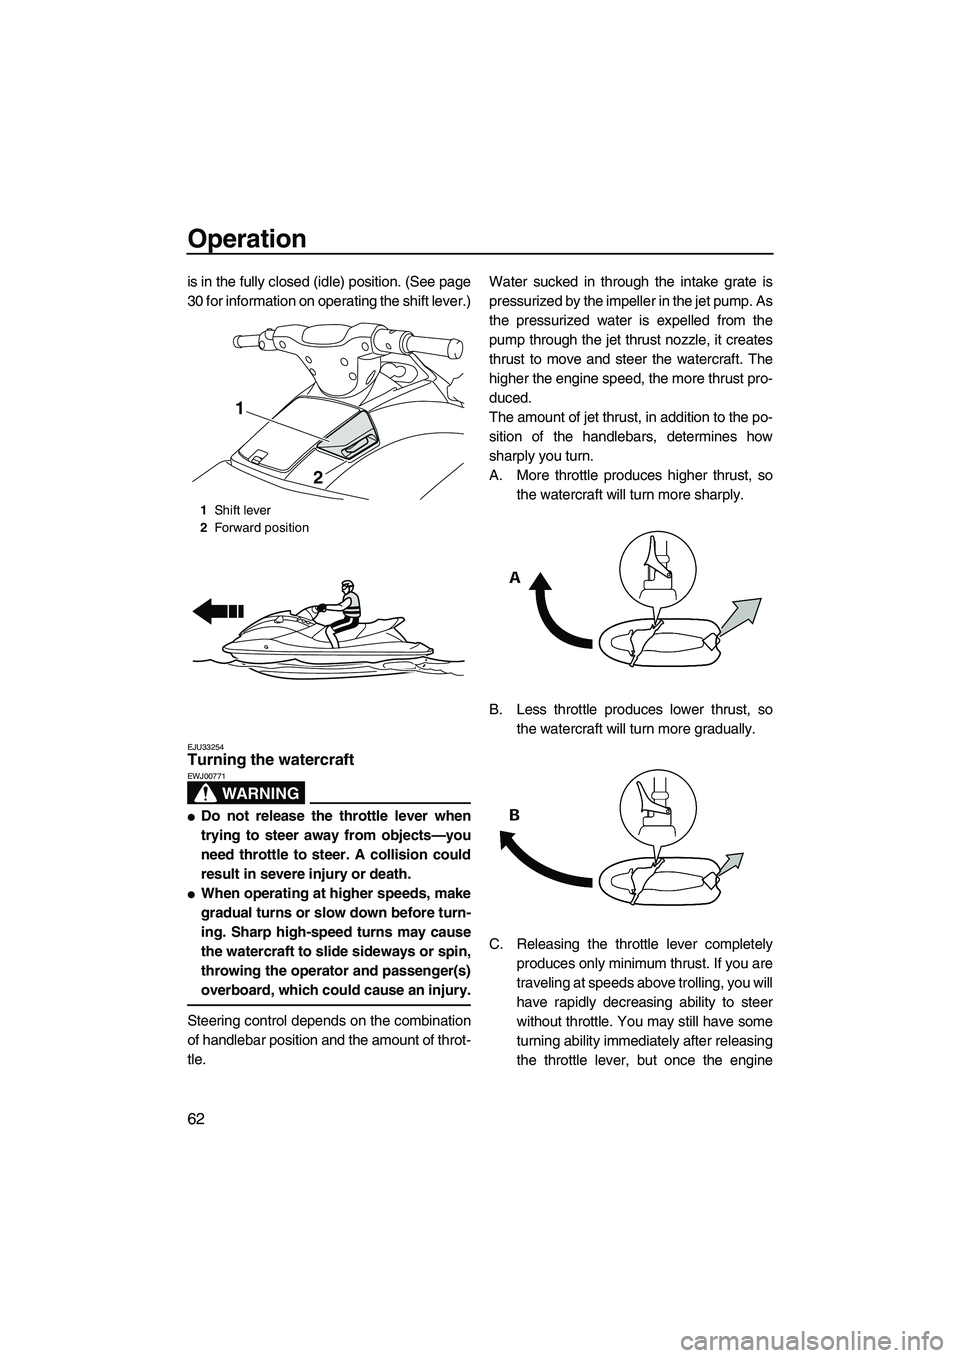 YAMAHA VXS 2012  Owners Manual Operation
62
is in the fully closed (idle) position. (See page
30 for information on operating the shift lever.)
EJU33254Turning the watercraft 
WARNING
EWJ00771
Do not release the throttle lever whe